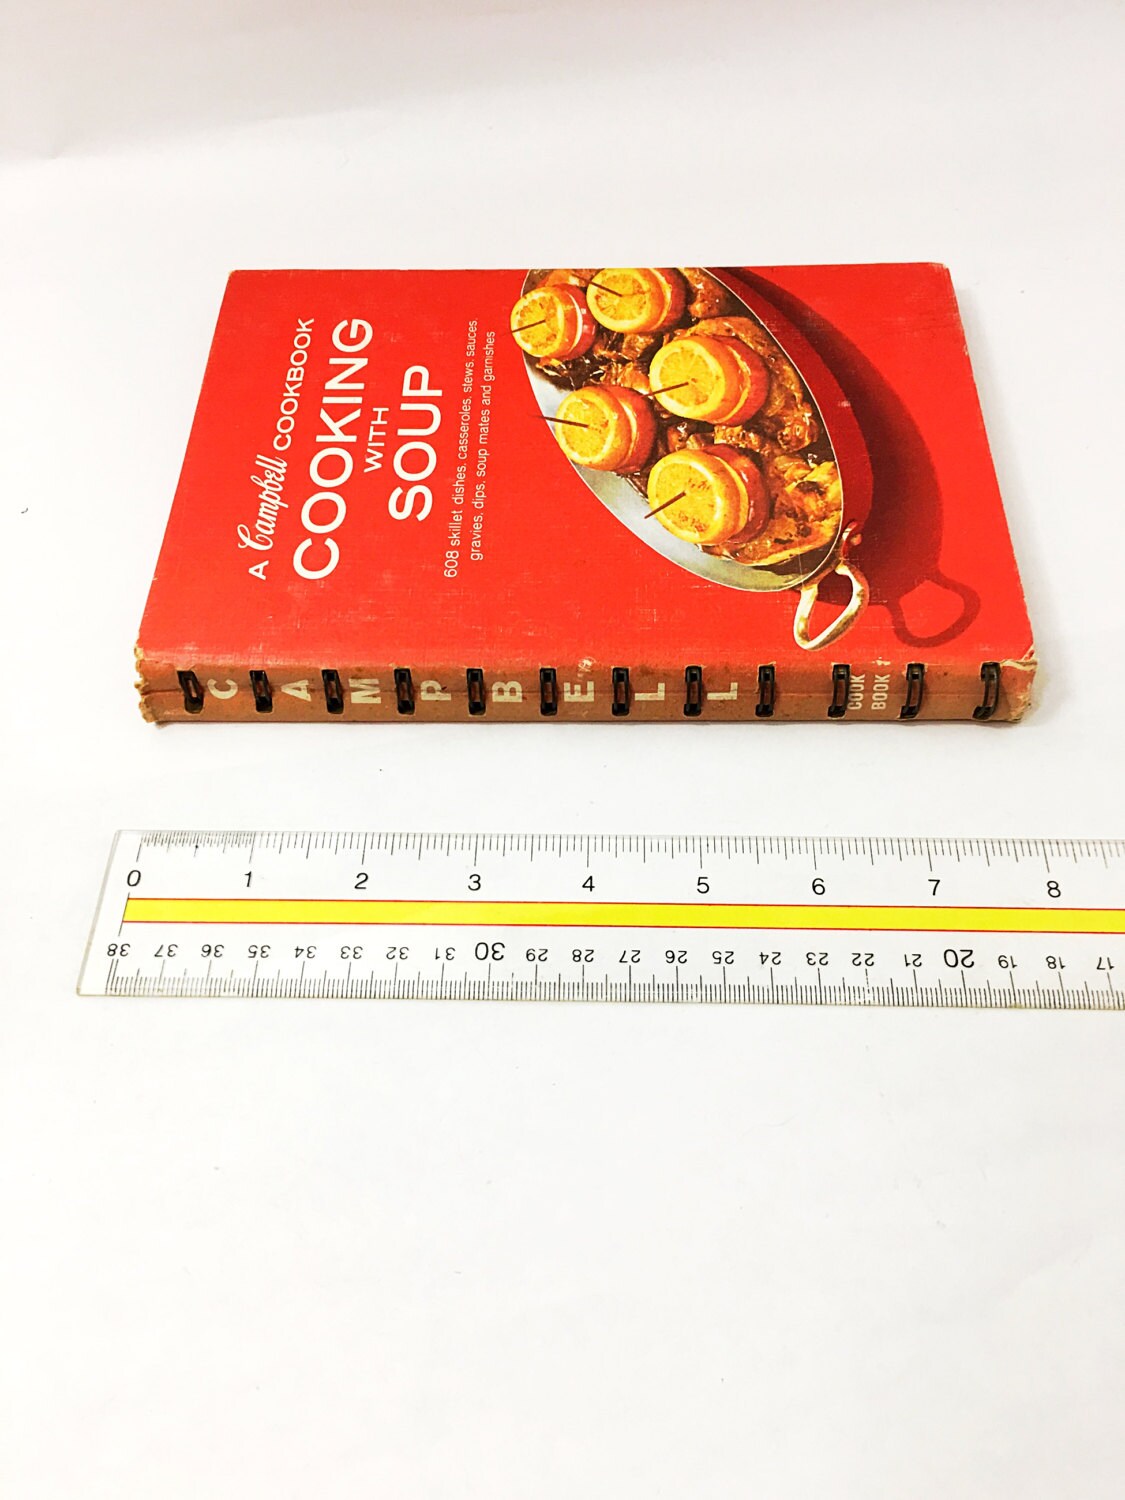 A Campbell's Cookbook. Cooking with Soup. Rare & Collectible Cookbook Red retro cookbook. Book lover gift. Andy Warhol